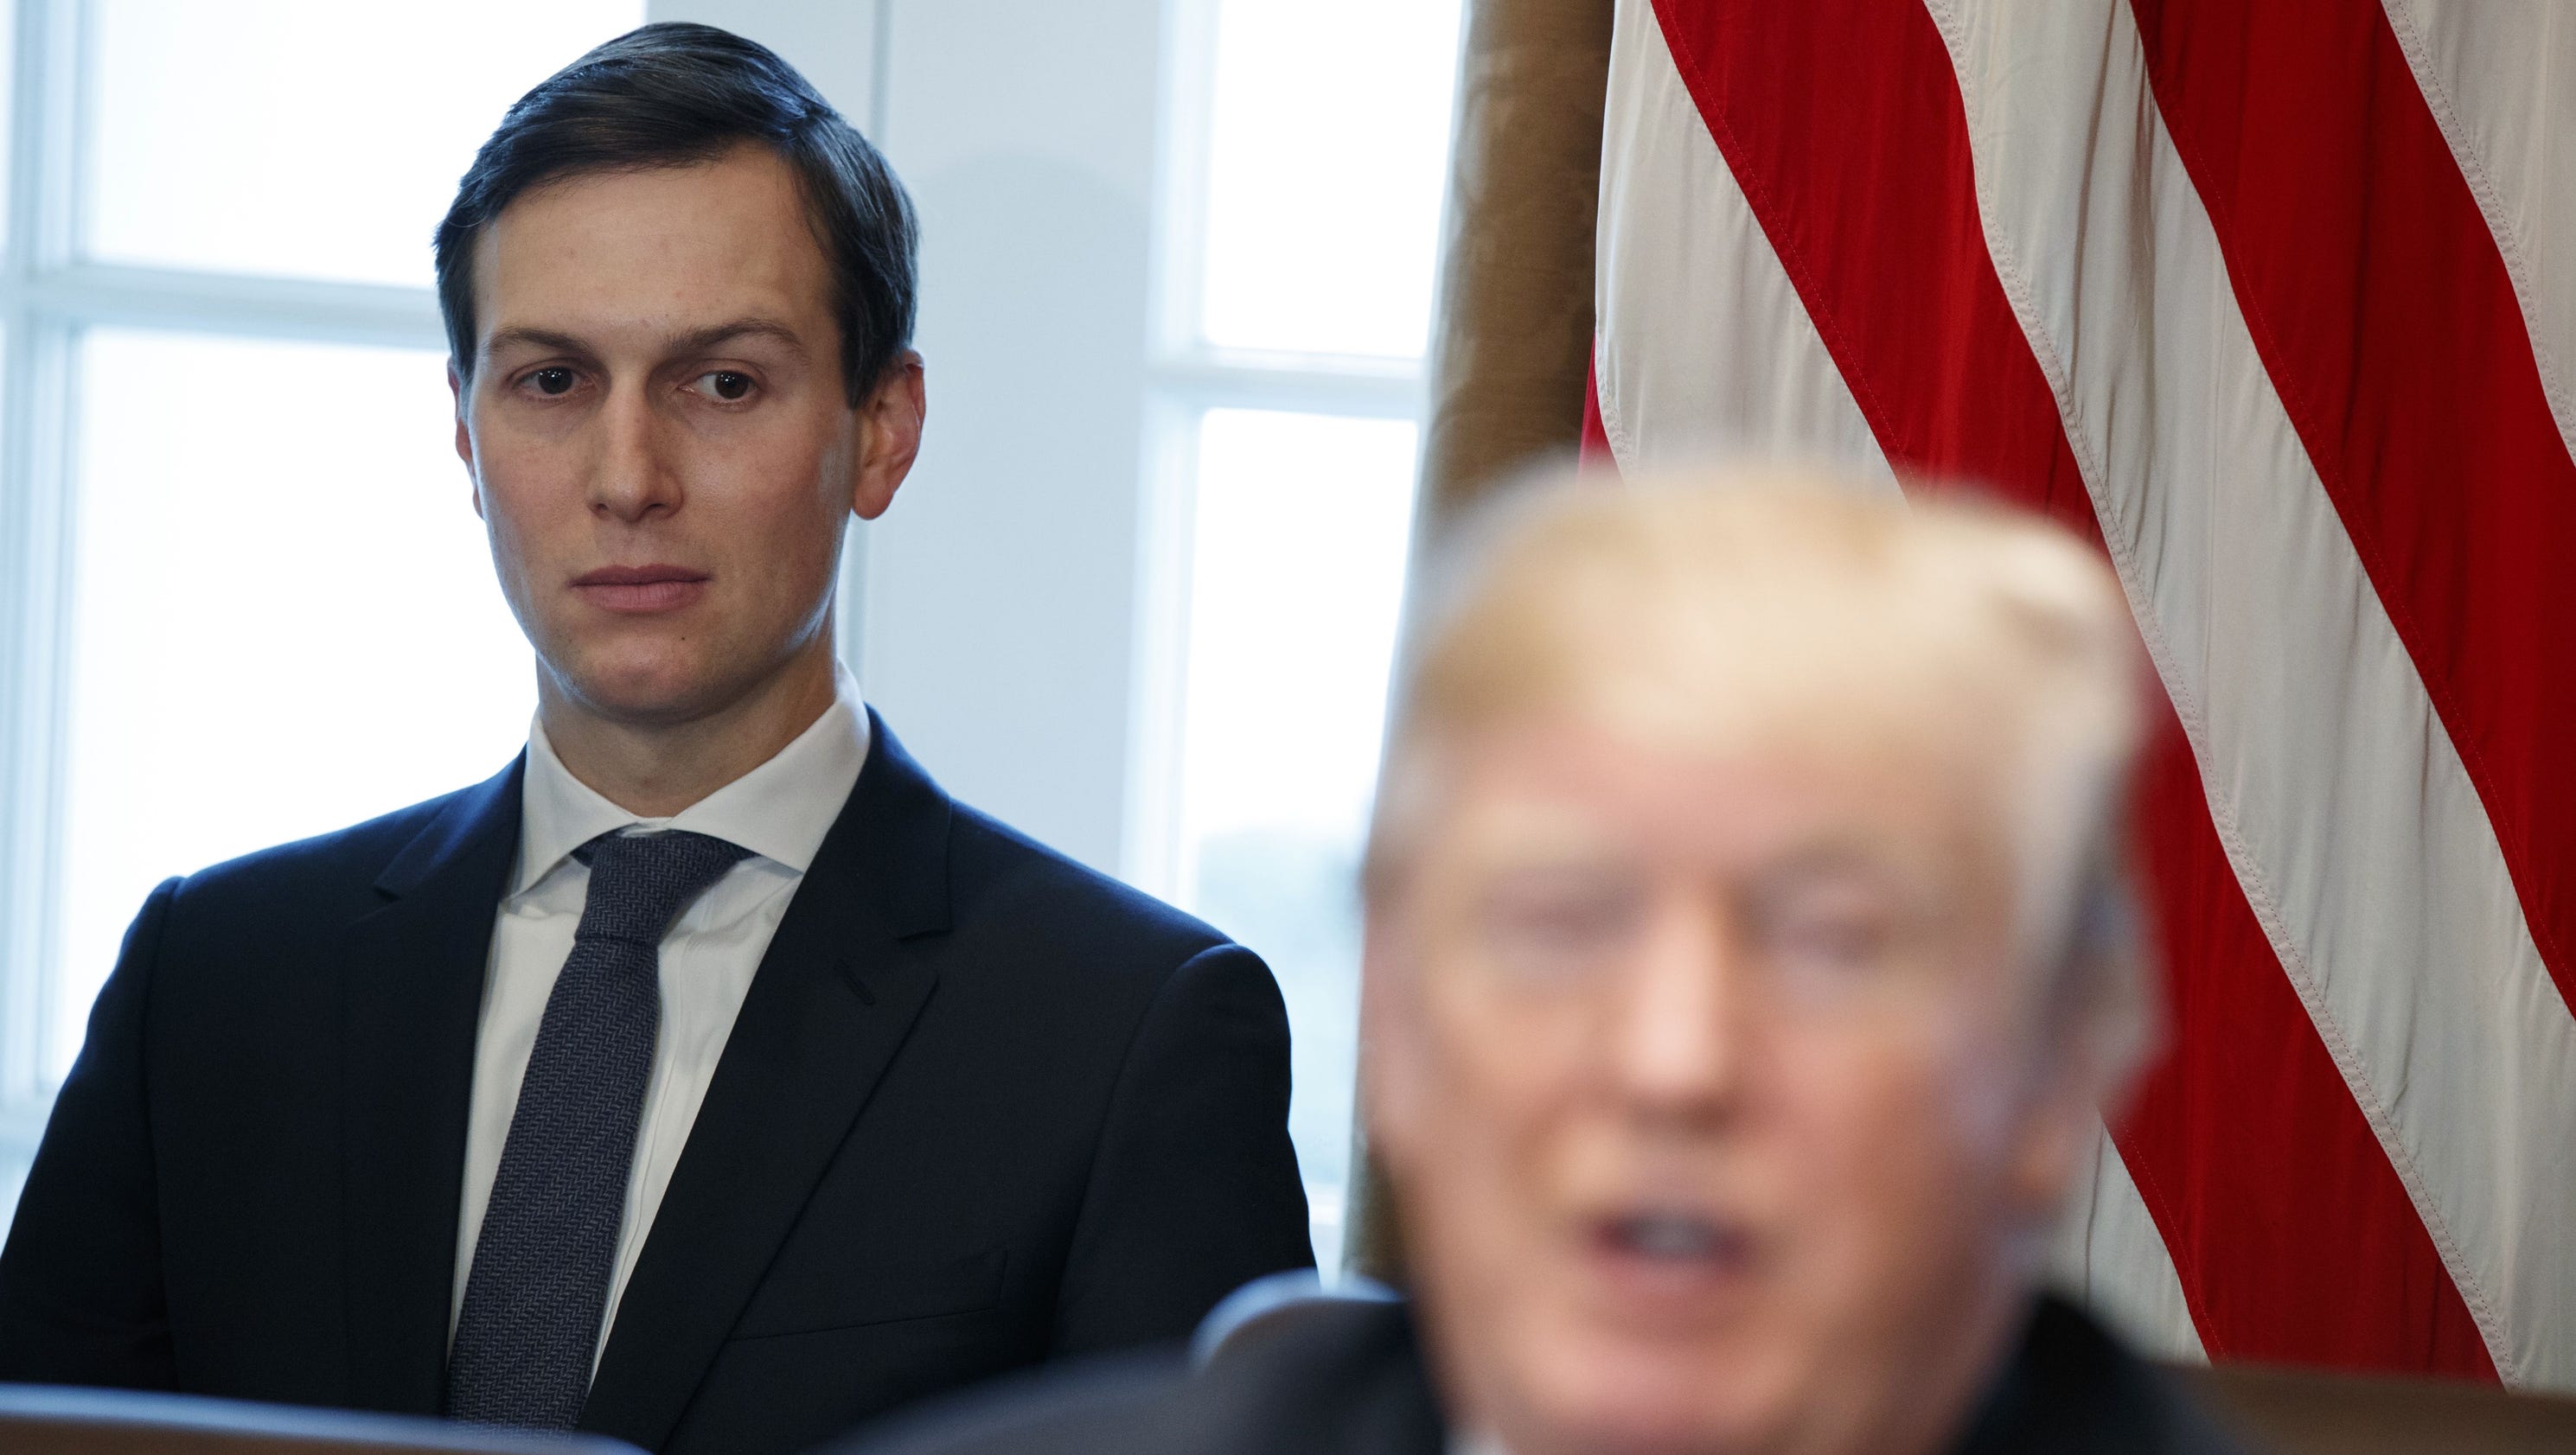 Report: Kushner's family business got loans after White House meetings with executives